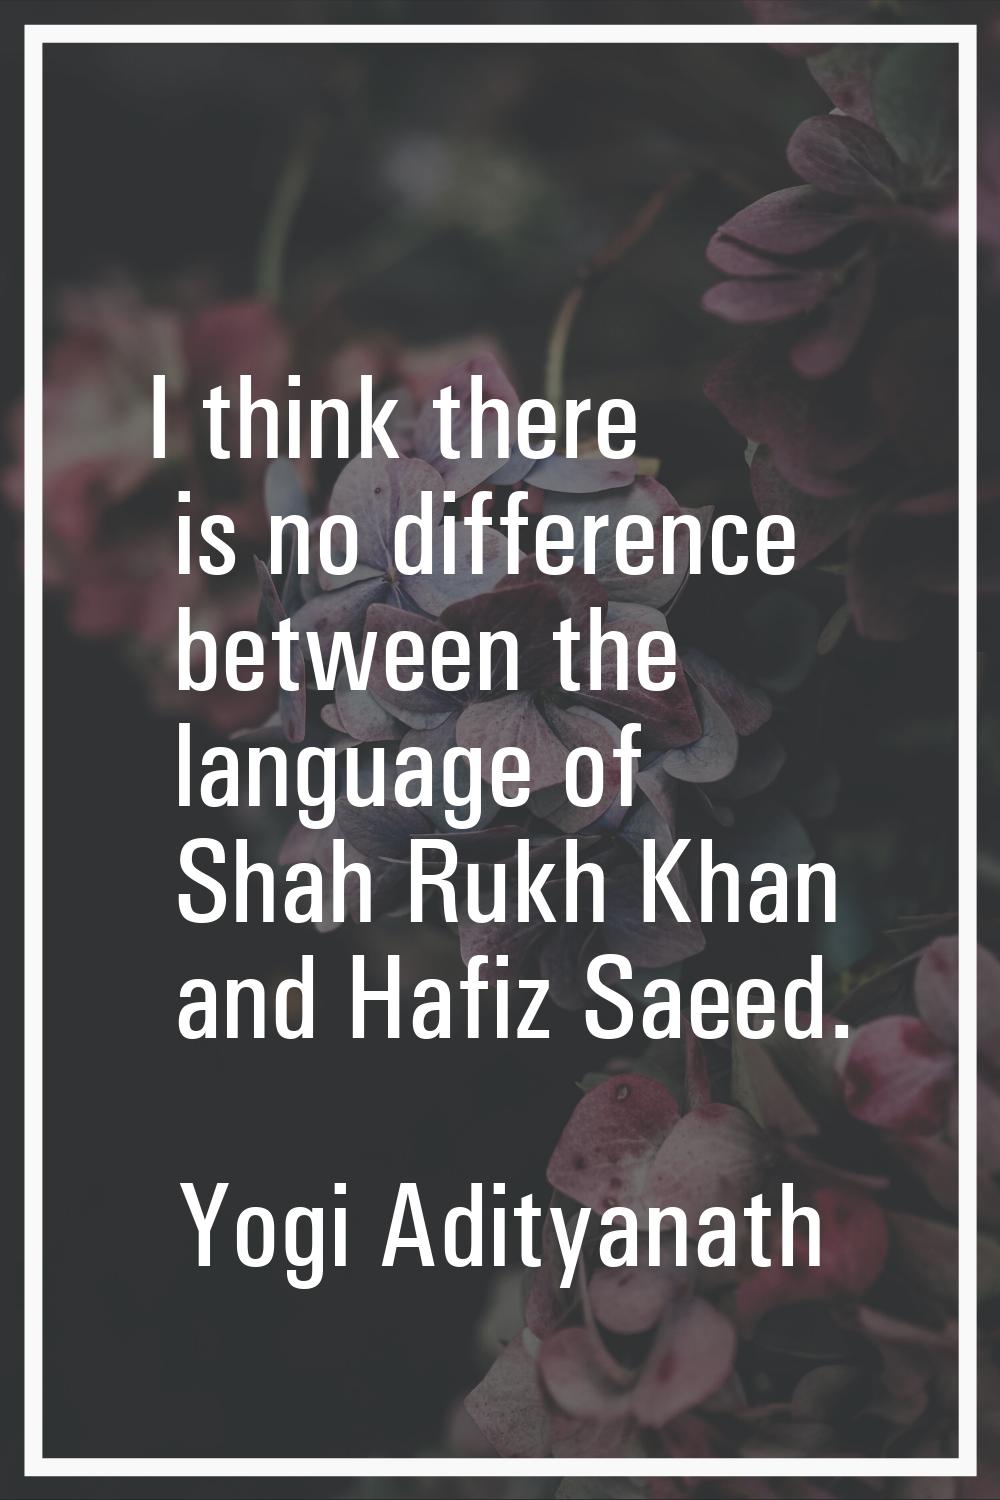 I think there is no difference between the language of Shah Rukh Khan and Hafiz Saeed.